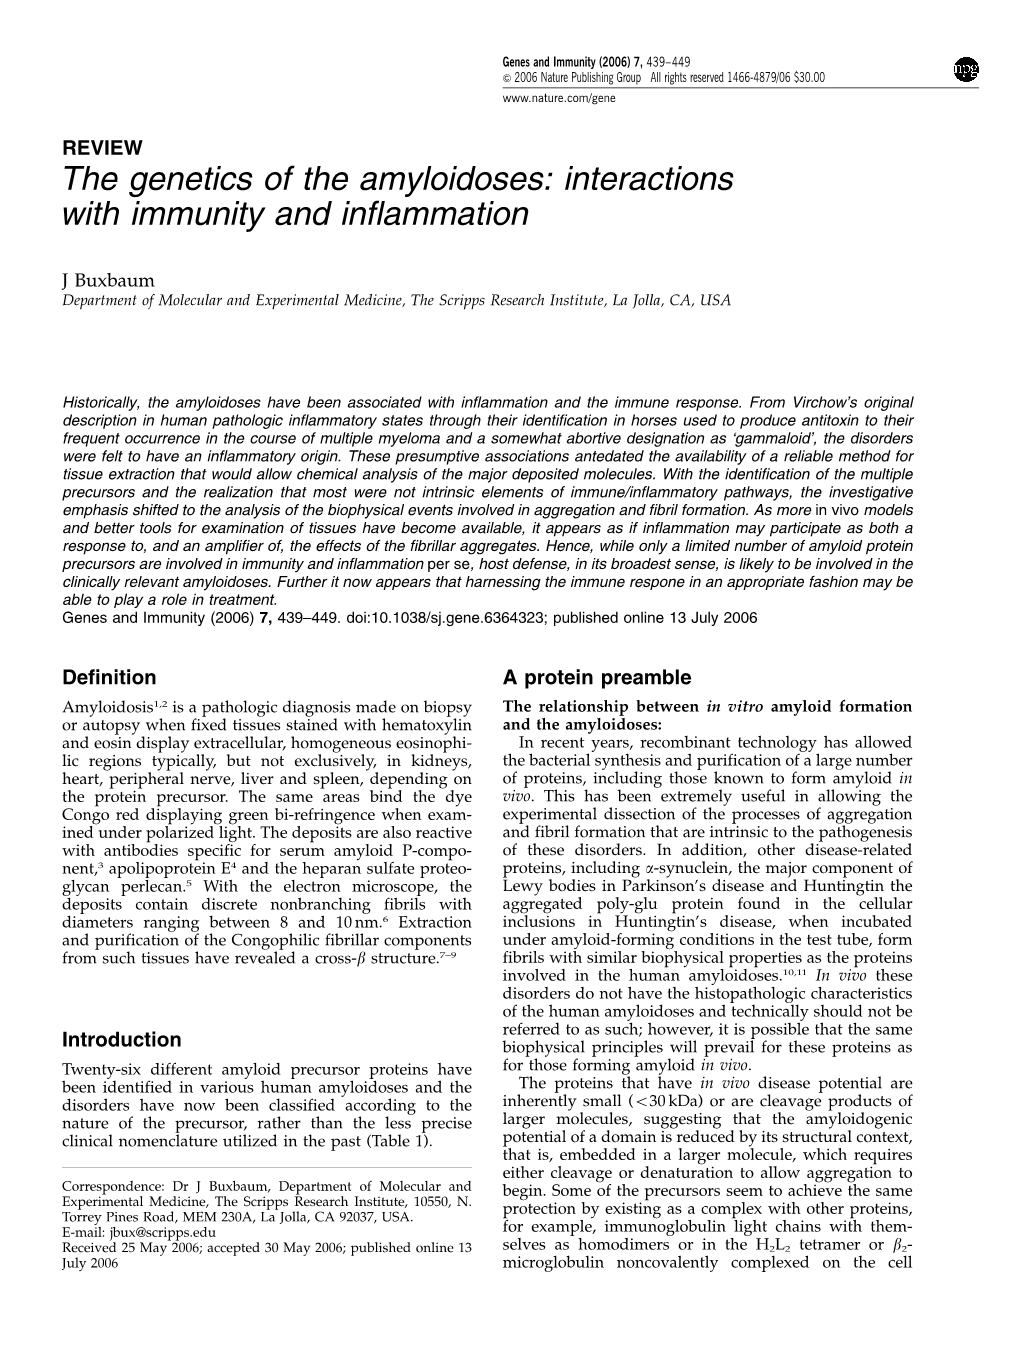 The Genetics of the Amyloidoses: Interactions with Immunity and Inflammation